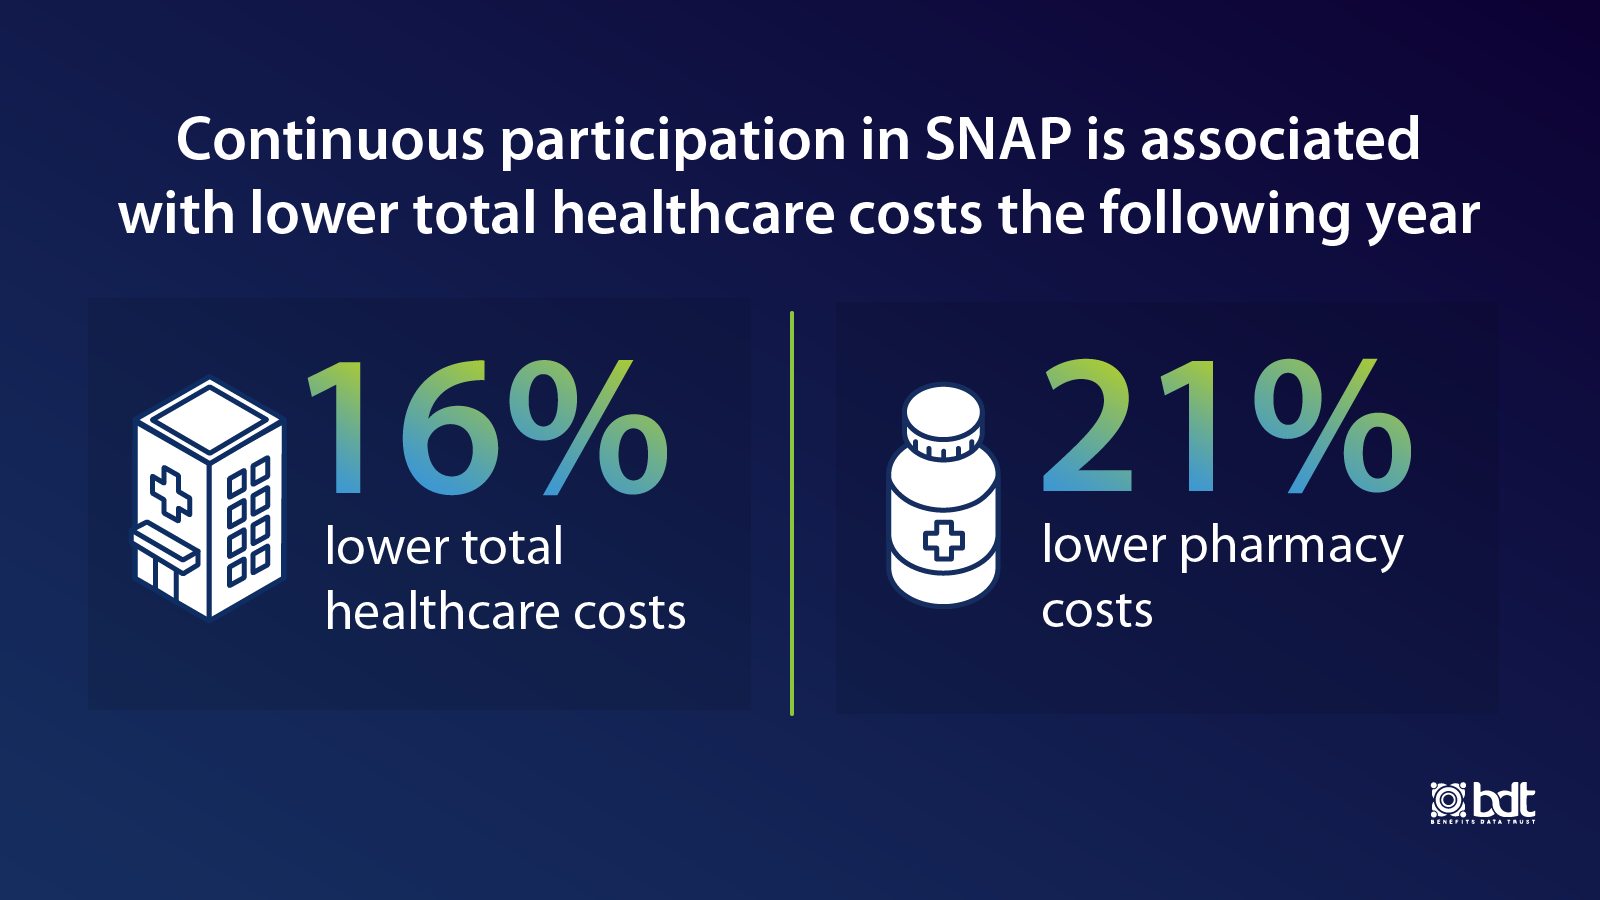 Graphic: continuous participation in SNAP is associated with lower healthcare costs the following year